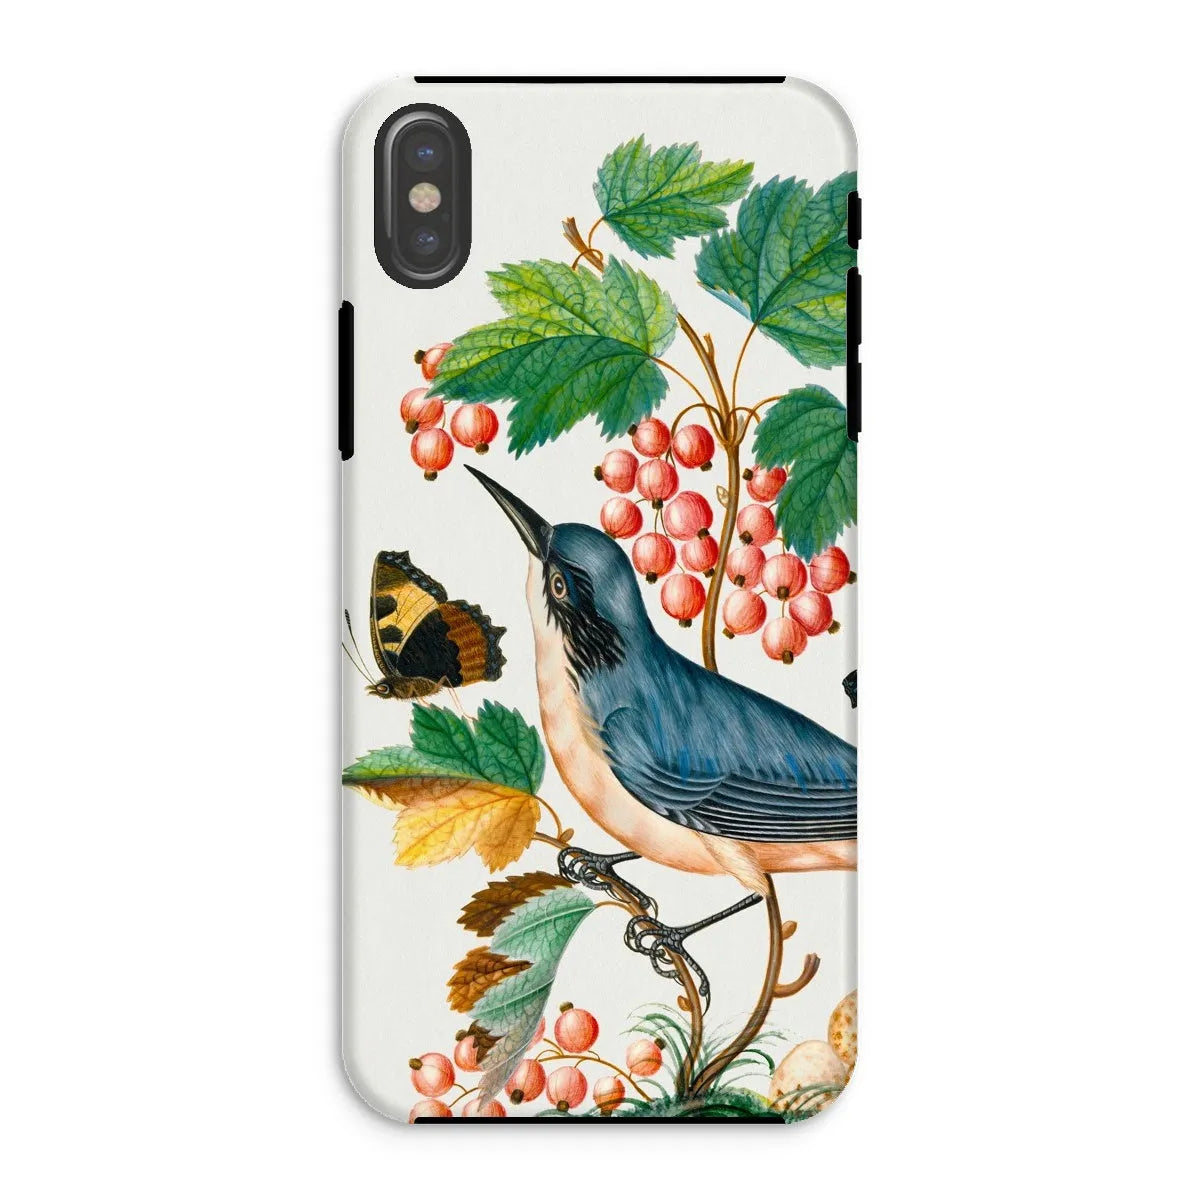 Warbler Admiral Wasps & Ants - Art Phone Case - James Bolton - Iphone Xs / Matte - Mobile Phone Cases - Aesthetic Art